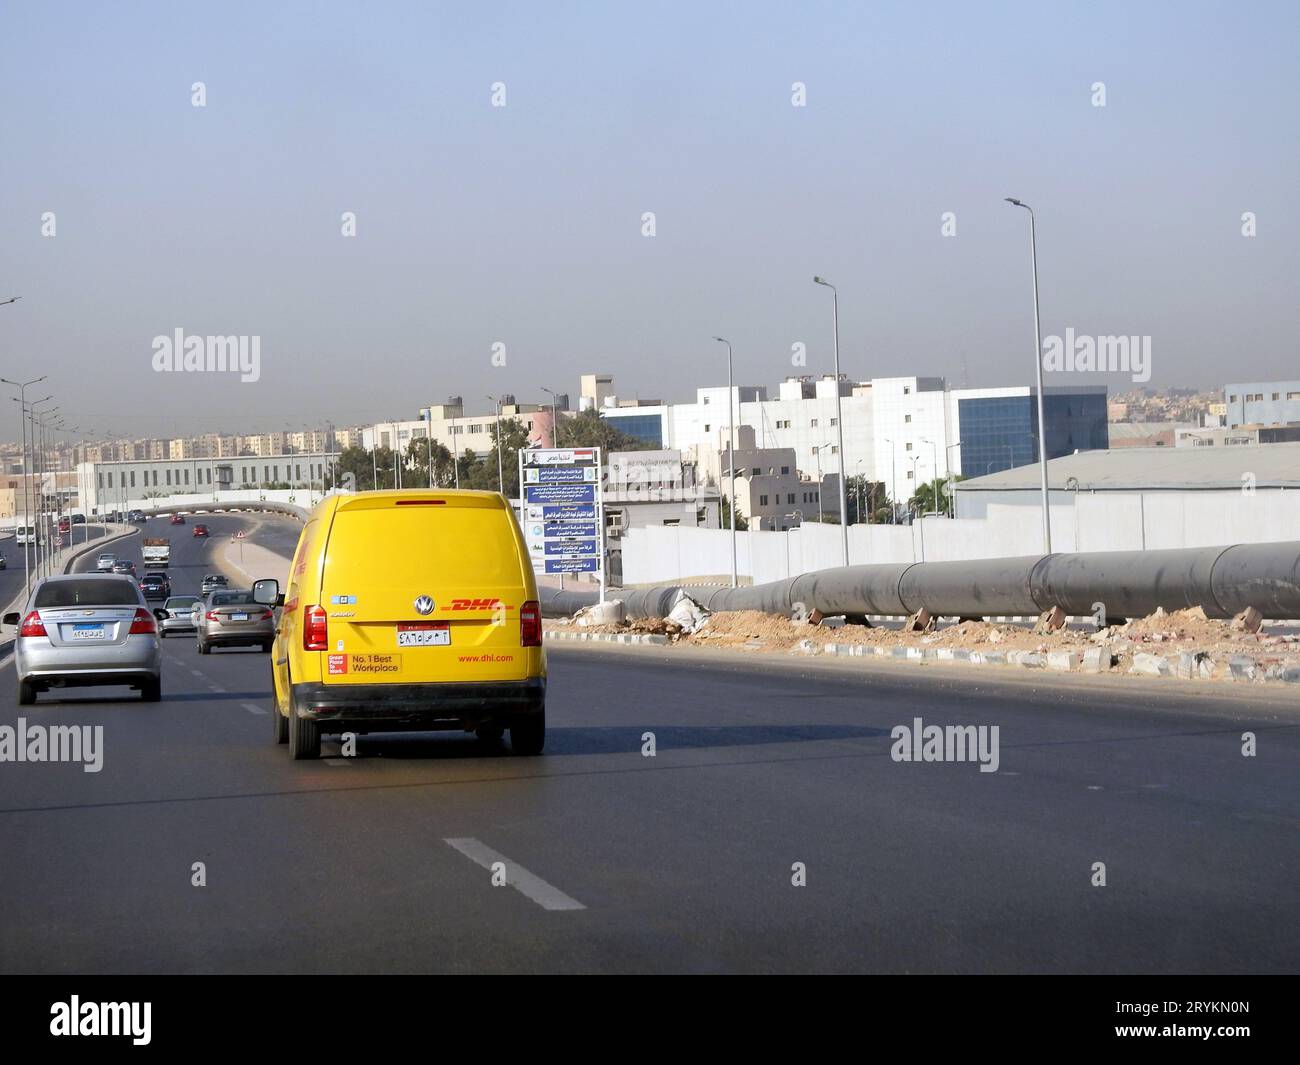 Cairo, Egypt, August 31 2023: DHL truck on its way delivering a package, DHL is the global leader in the logistics industry specializing in internatio Stock Photo